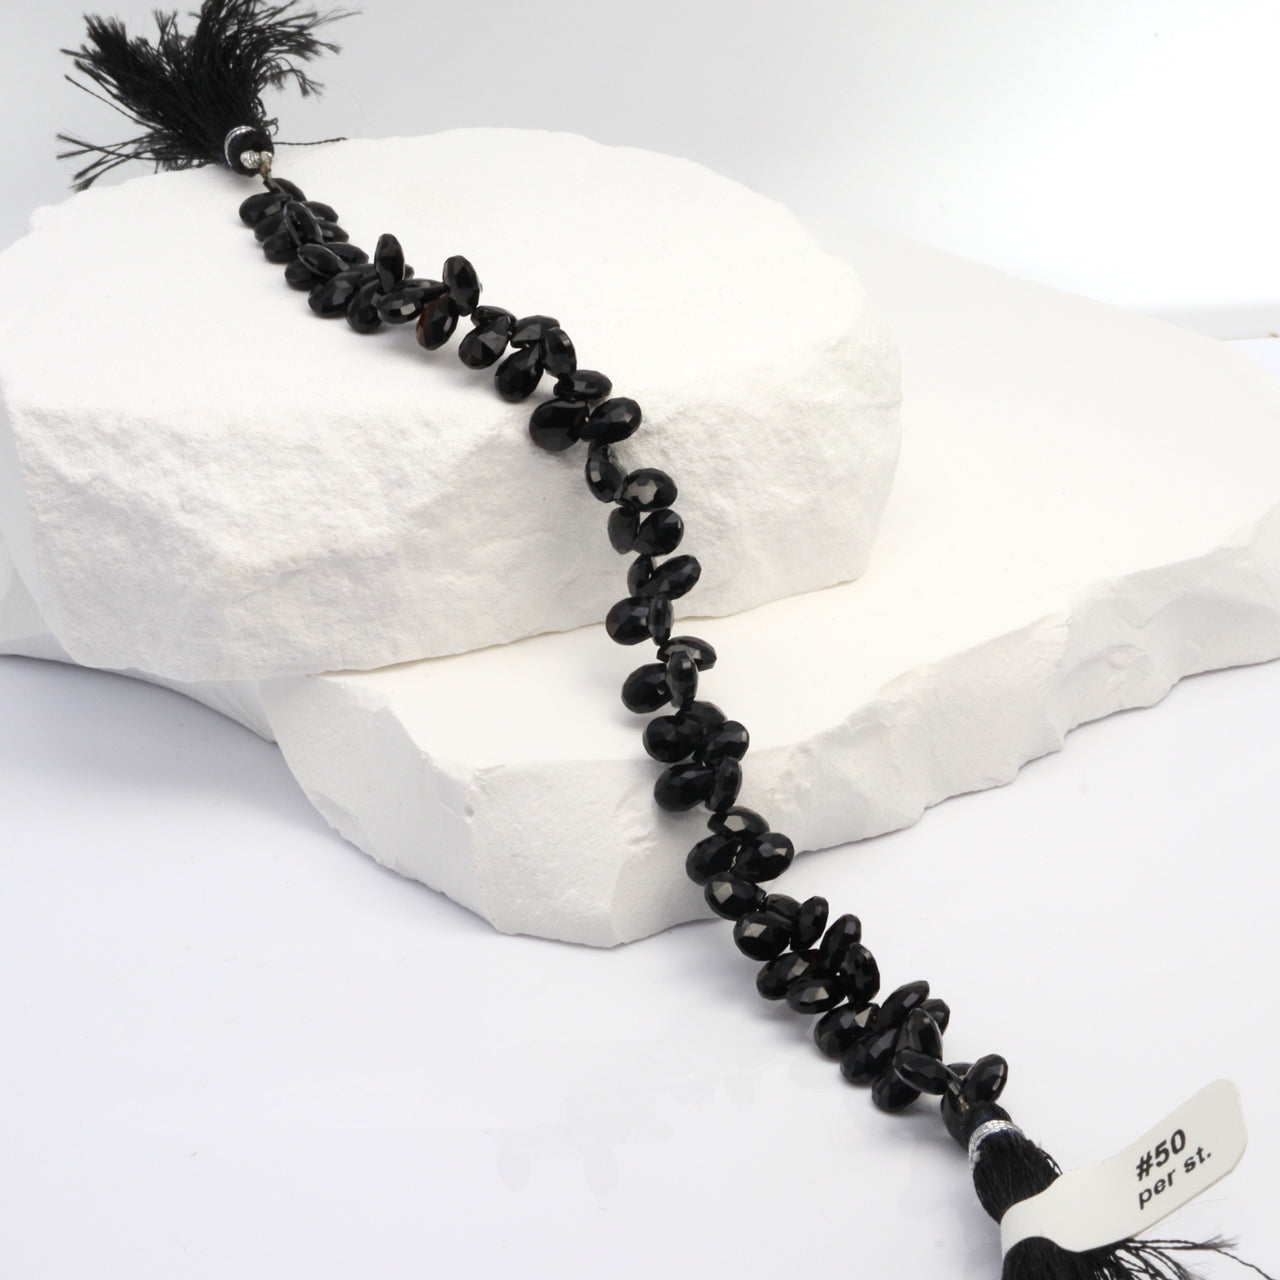 Black Spinel 7x4mm Faceted Pear Shaped Briolettes